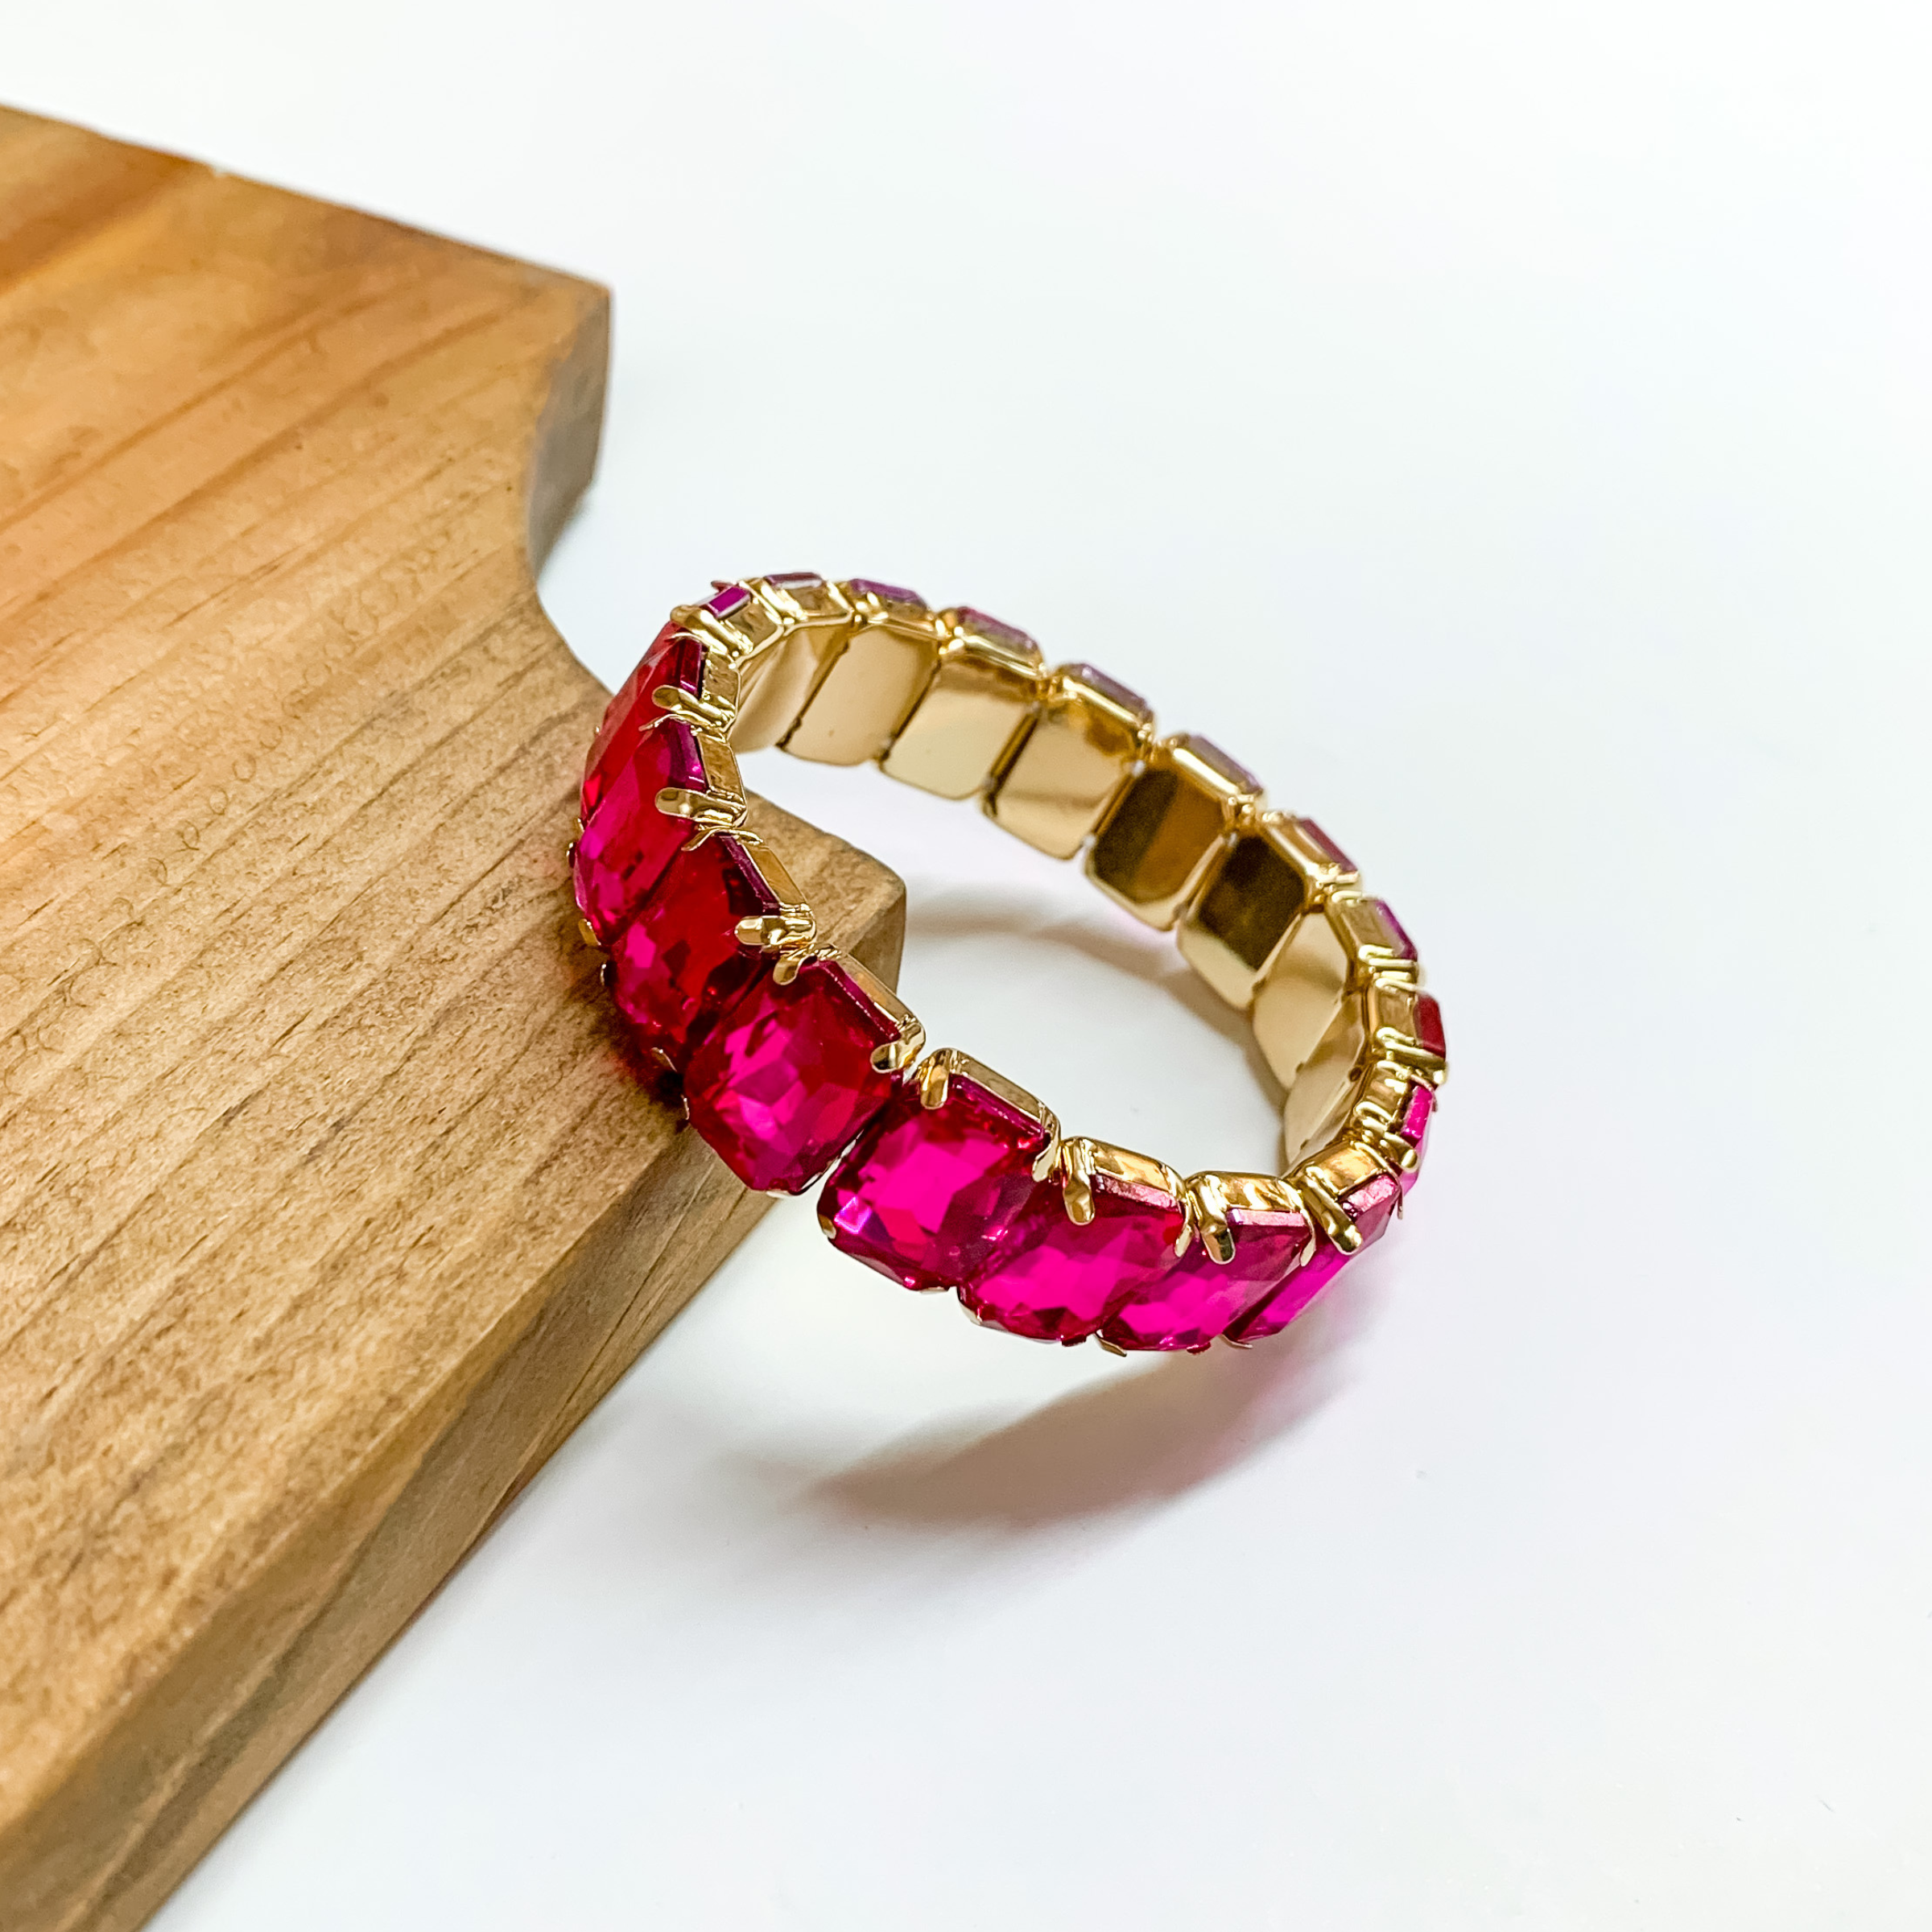 Hot pink rectangle crystal bracelet with a gold setting. This bracelet is pictured partially laying on a wood block on a white background. 